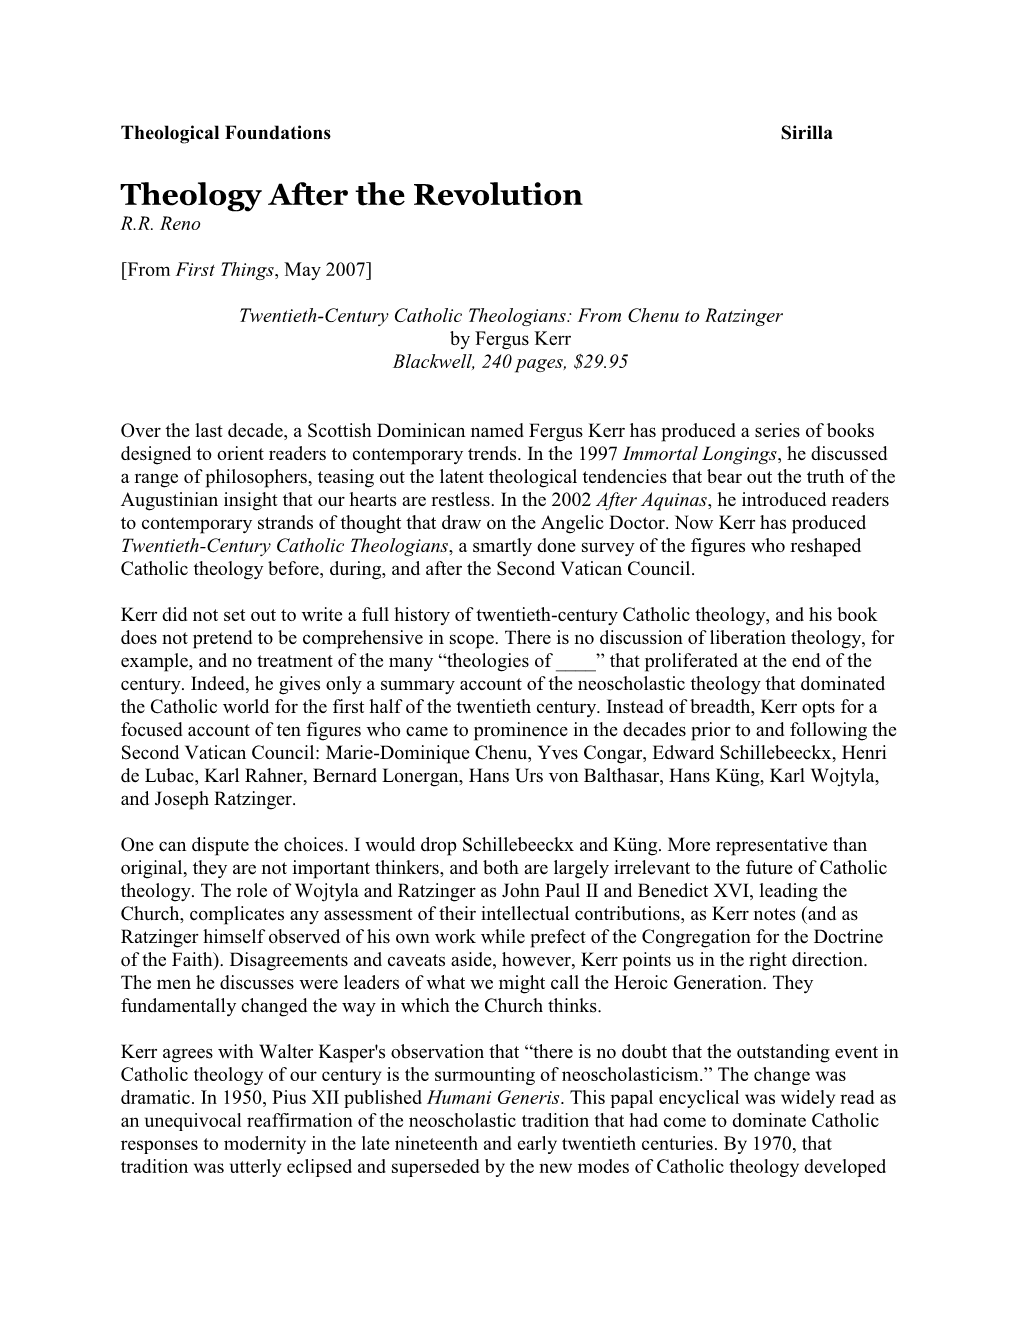 RENO Theology After the Revolution